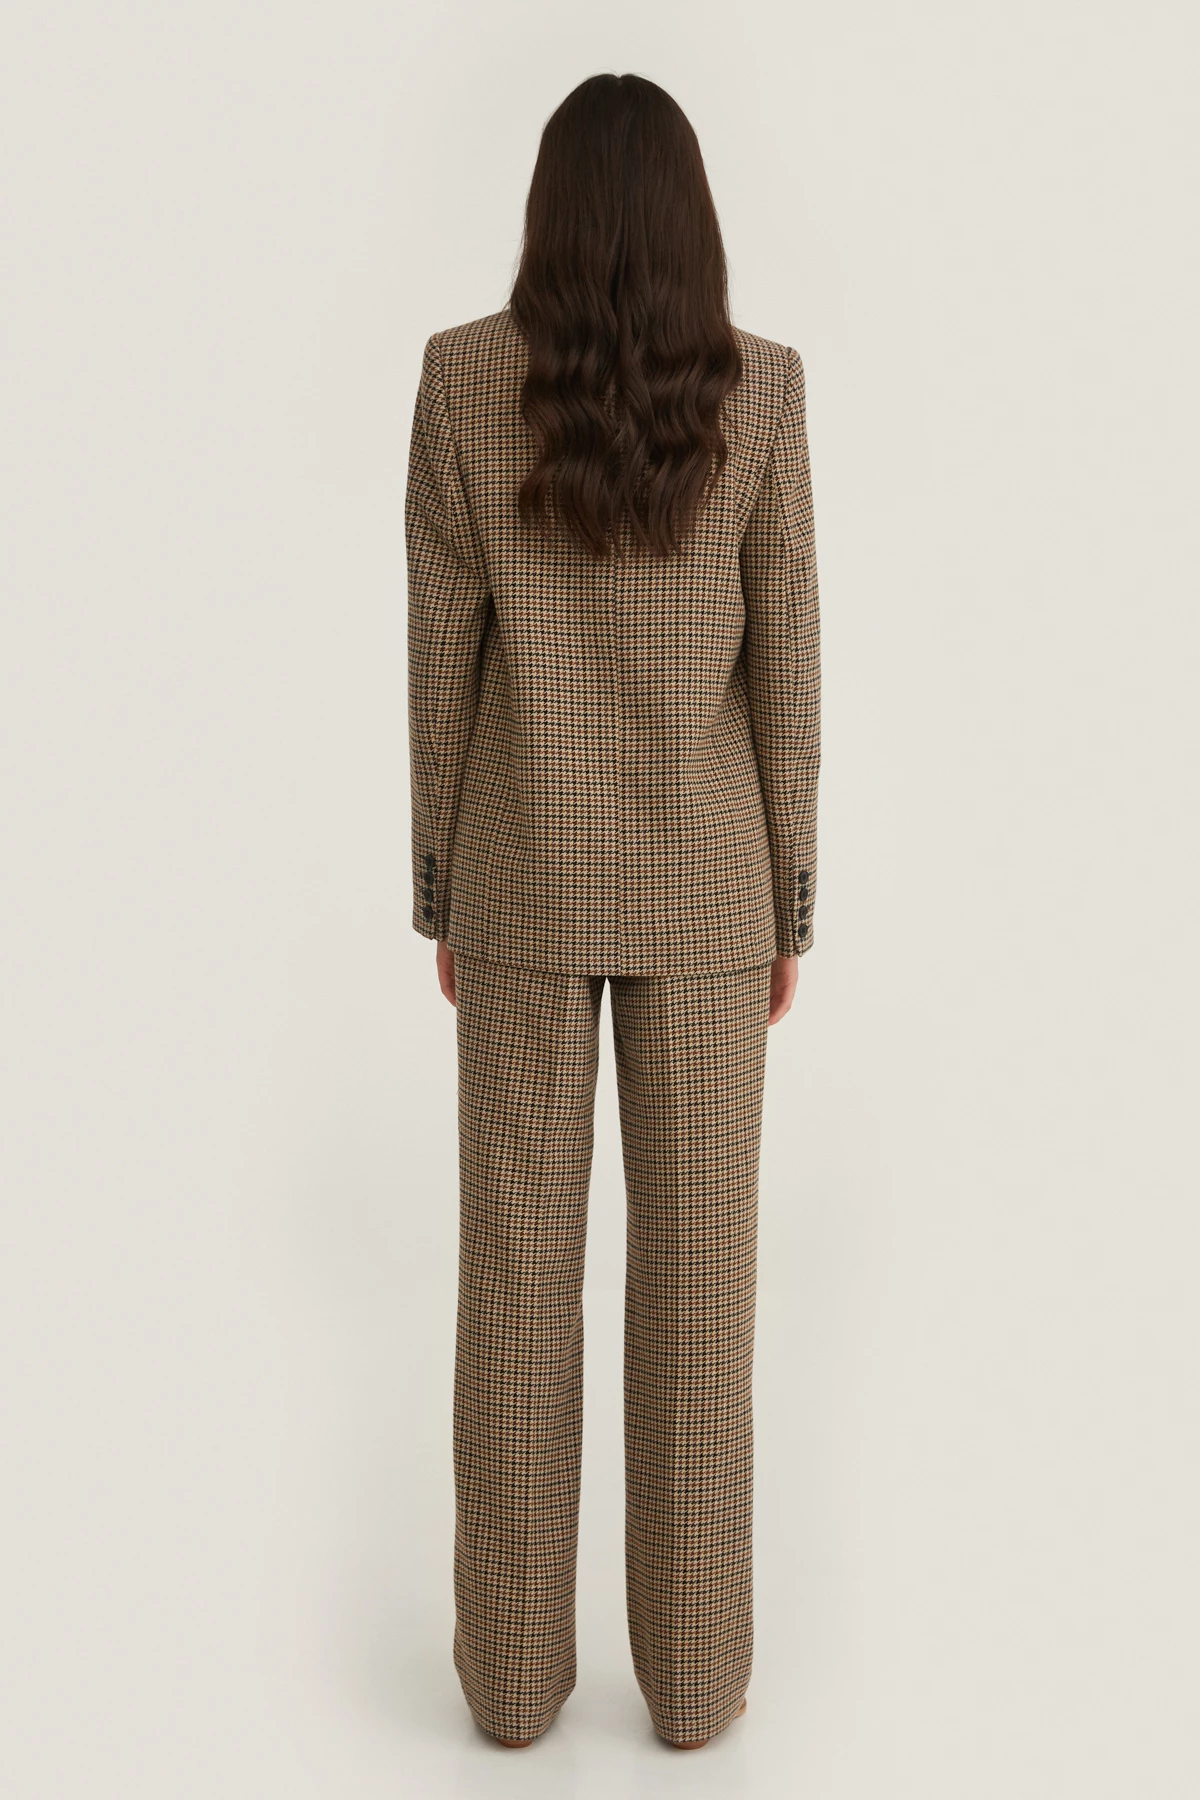 Double-breasted jacket in houndstooth pattern with wool, photo 4